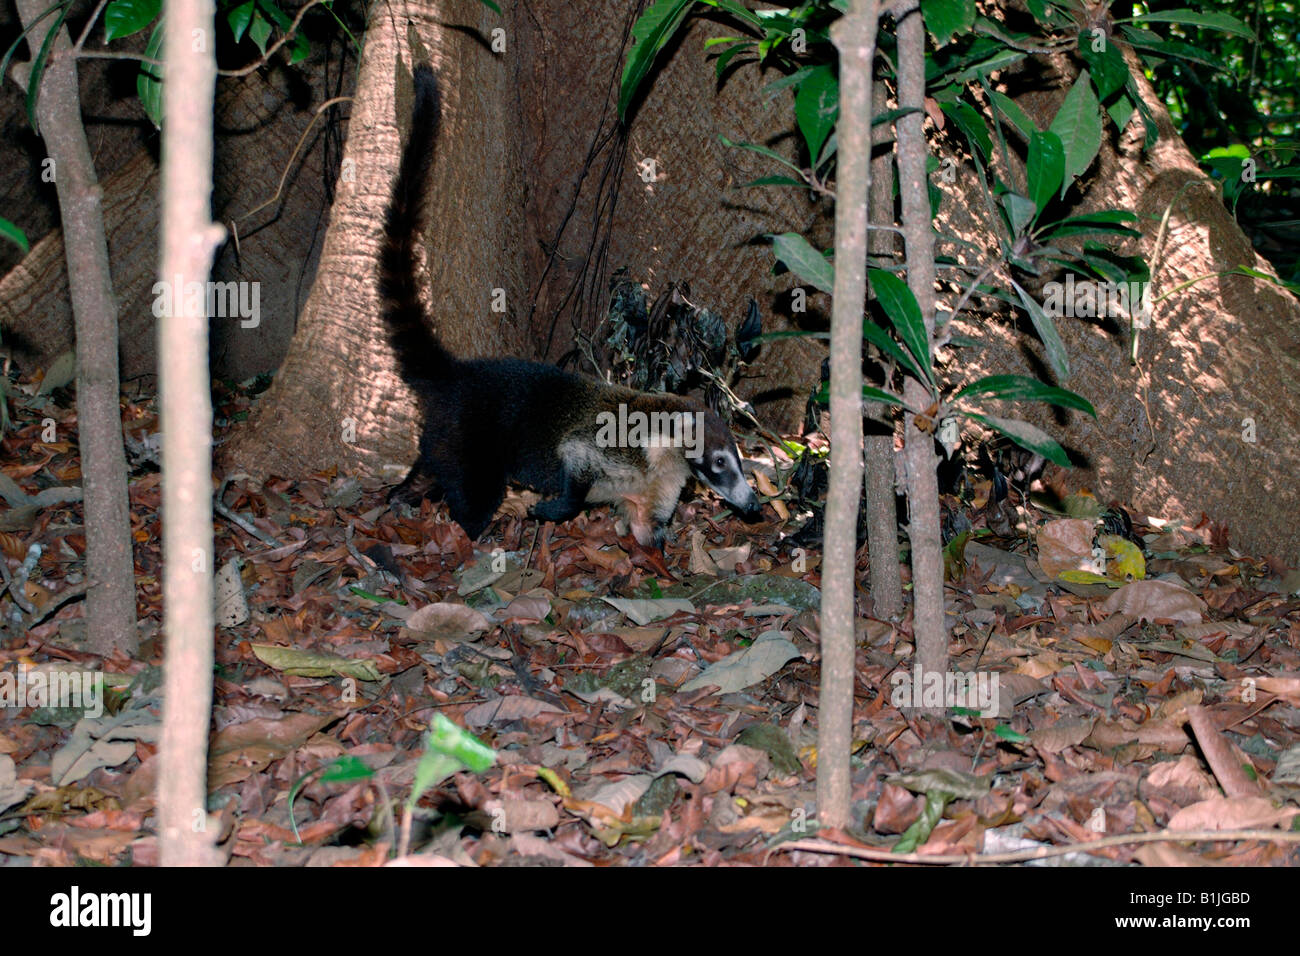 white-nosed coati (Nasua narica), in front of buttress root, Costa Rica, Carara National Park Stock Photo